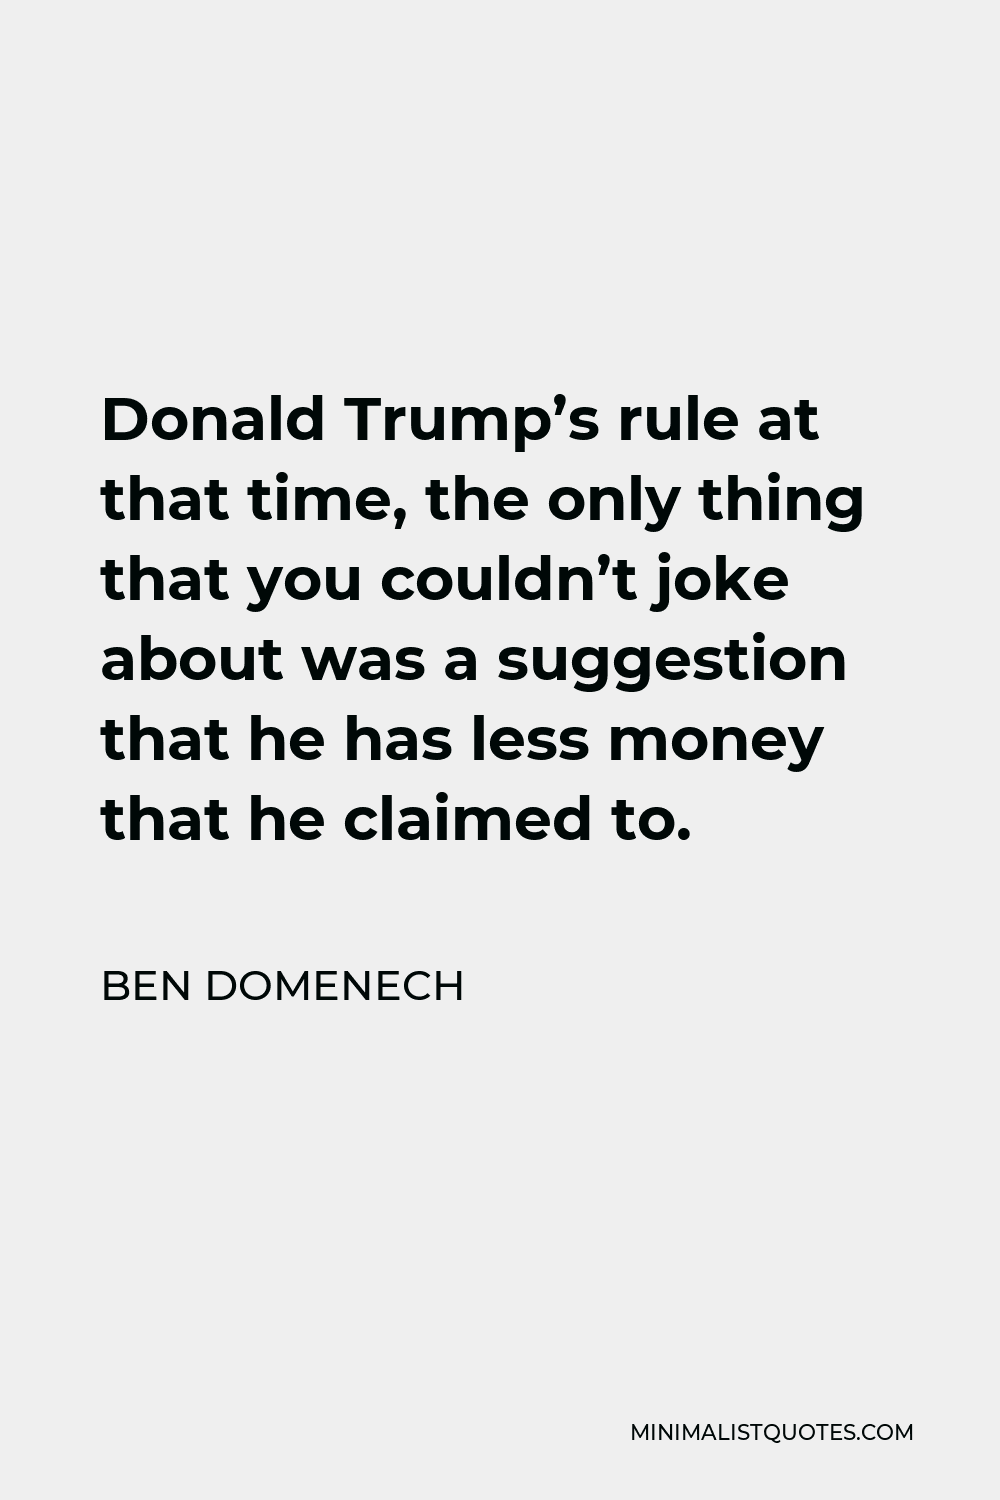 Ben Domenech Quote - Donald Trump’s rule at that time, the only thing that you couldn’t joke about was a suggestion that he has less money that he claimed to.